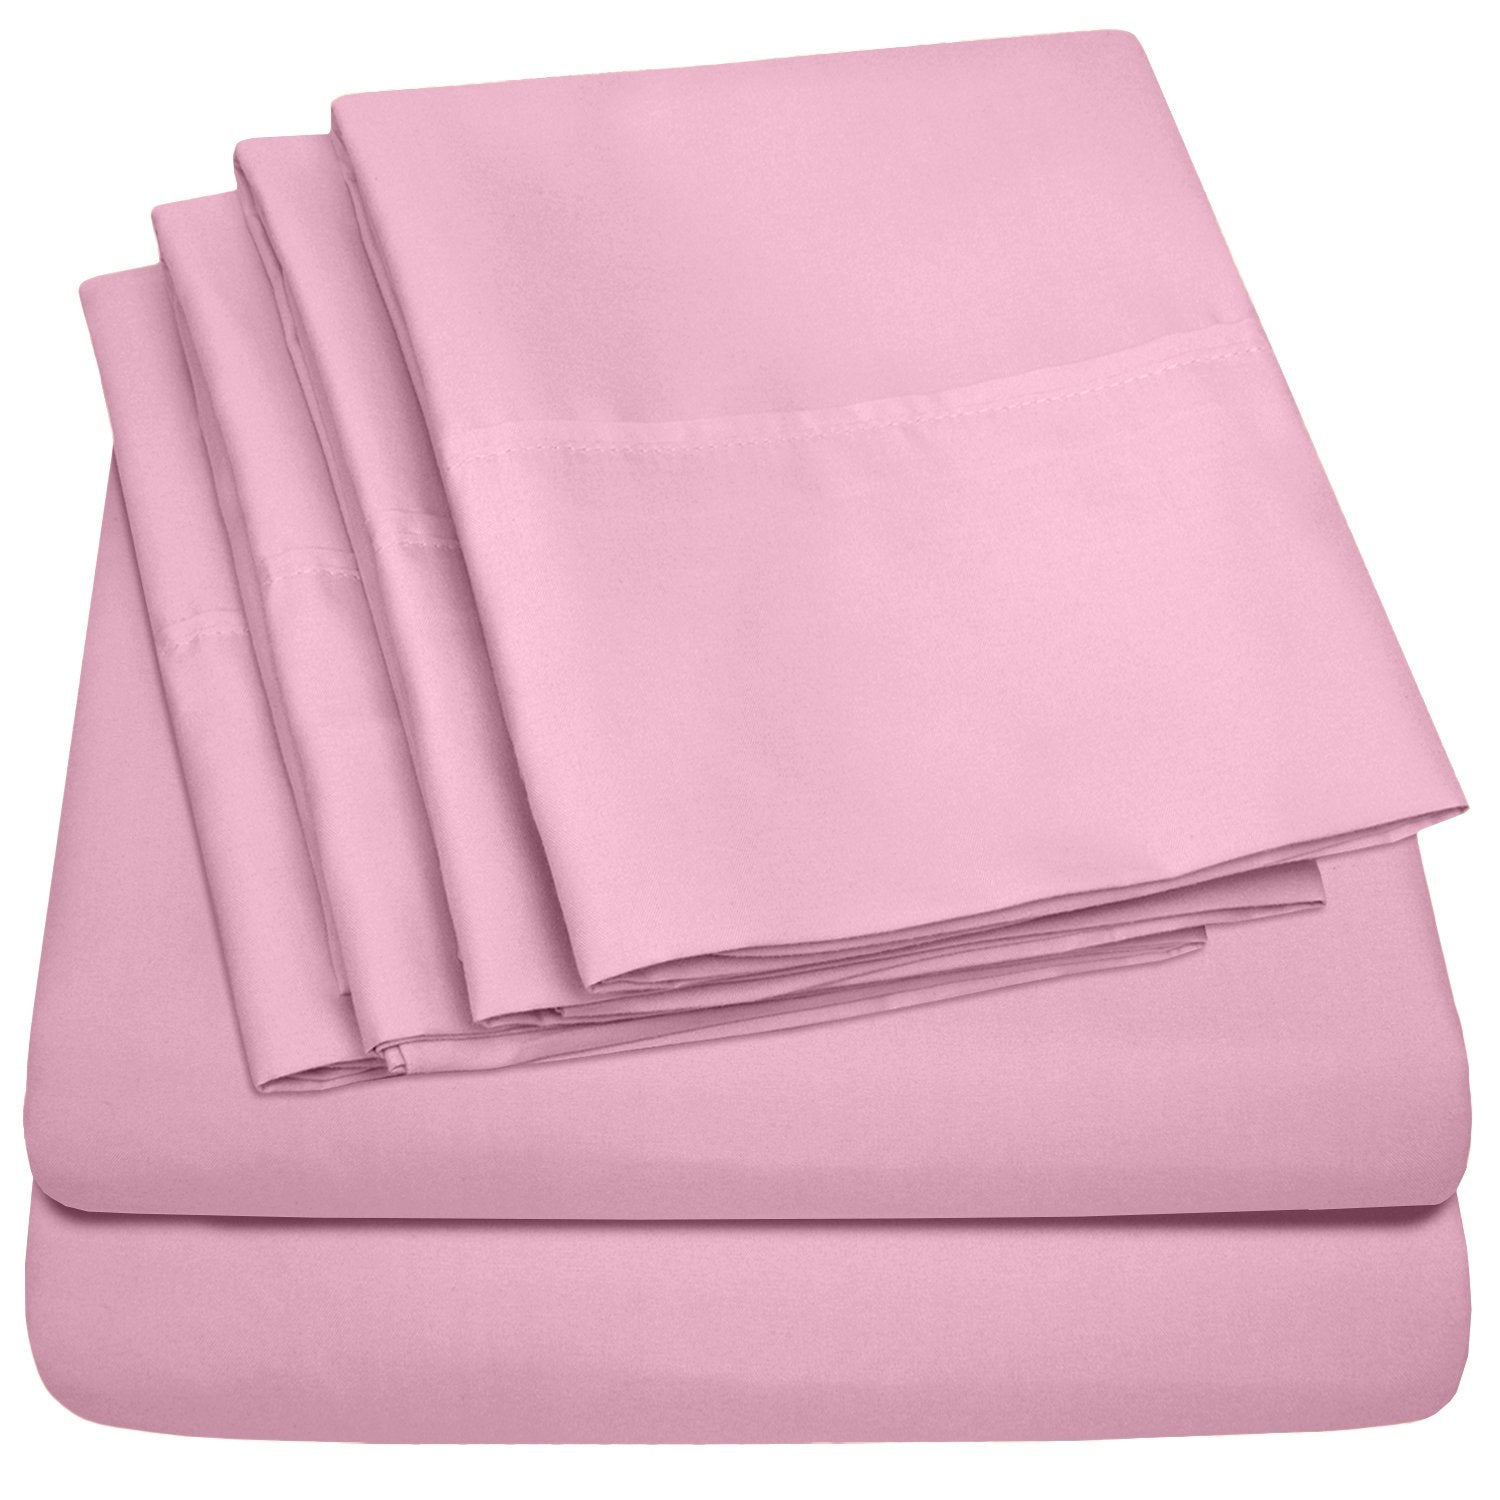 Deluxe 6-Piece Bed Sheet Set (Pink) - Folded